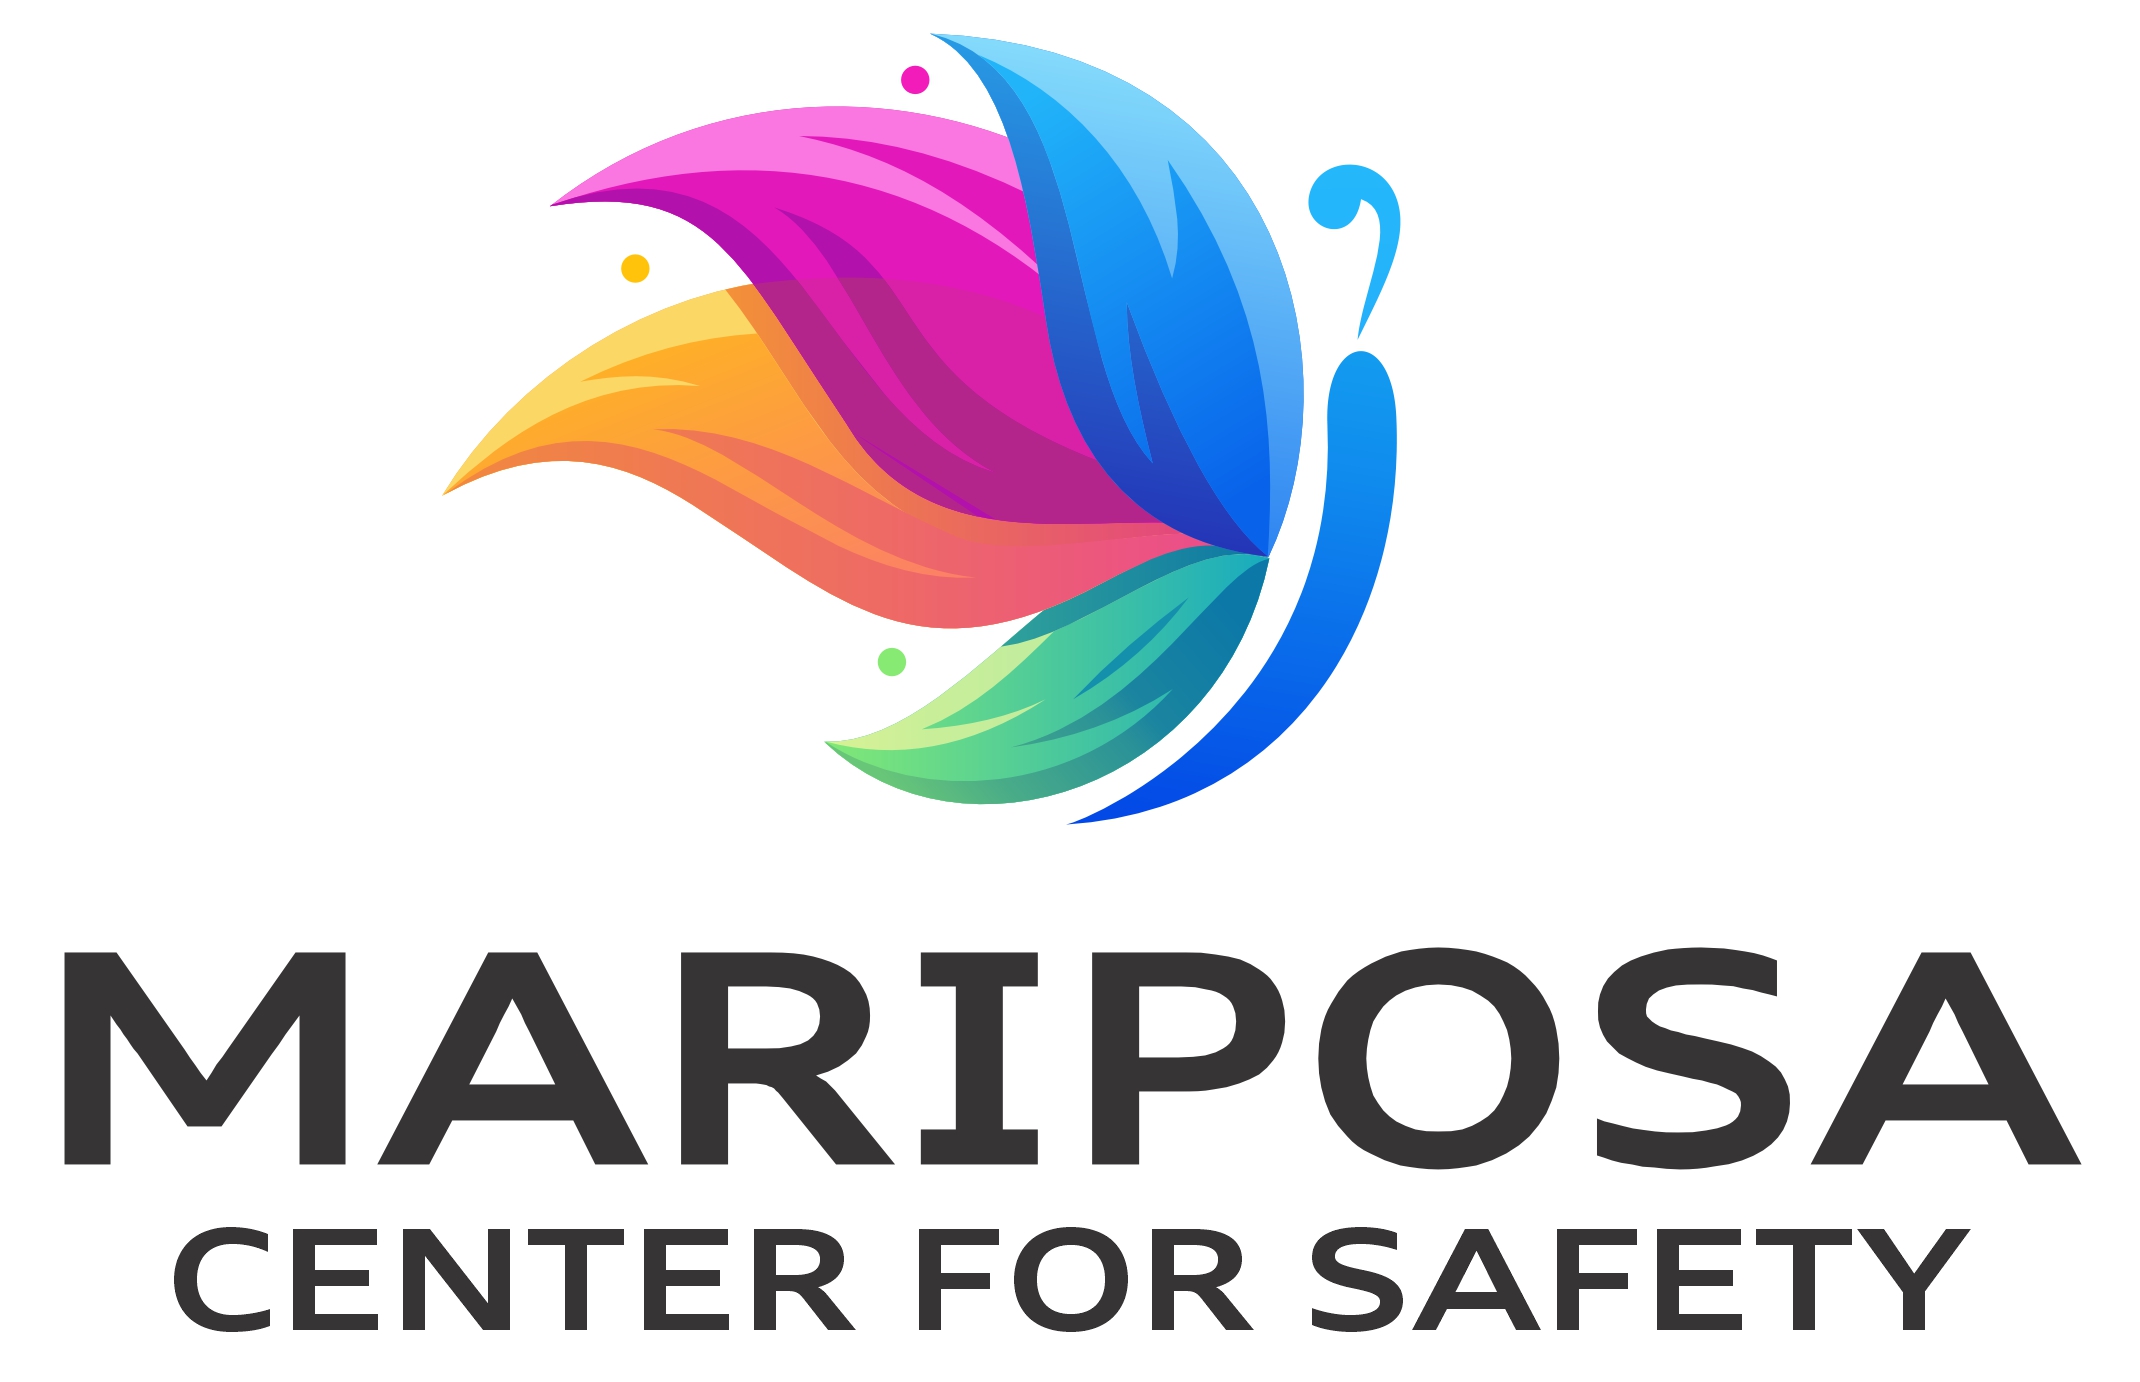 Mariposa Center for Safety